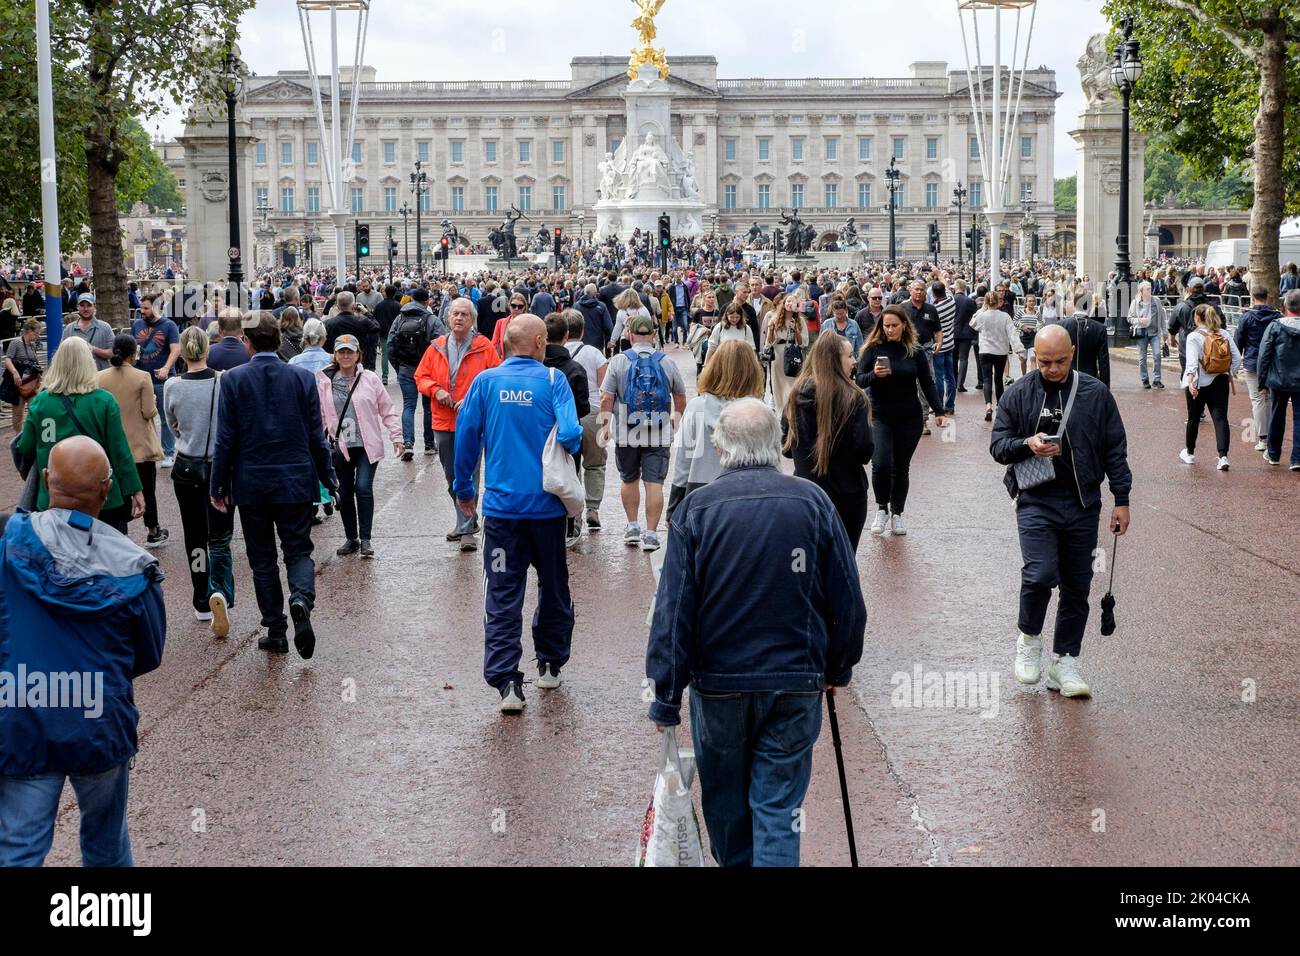 London, UK. 9th September 2022. People gather on The Mall in front of Buckingham Palace to pay their respects following the death of Queen Elizabeth II. Stock Photo